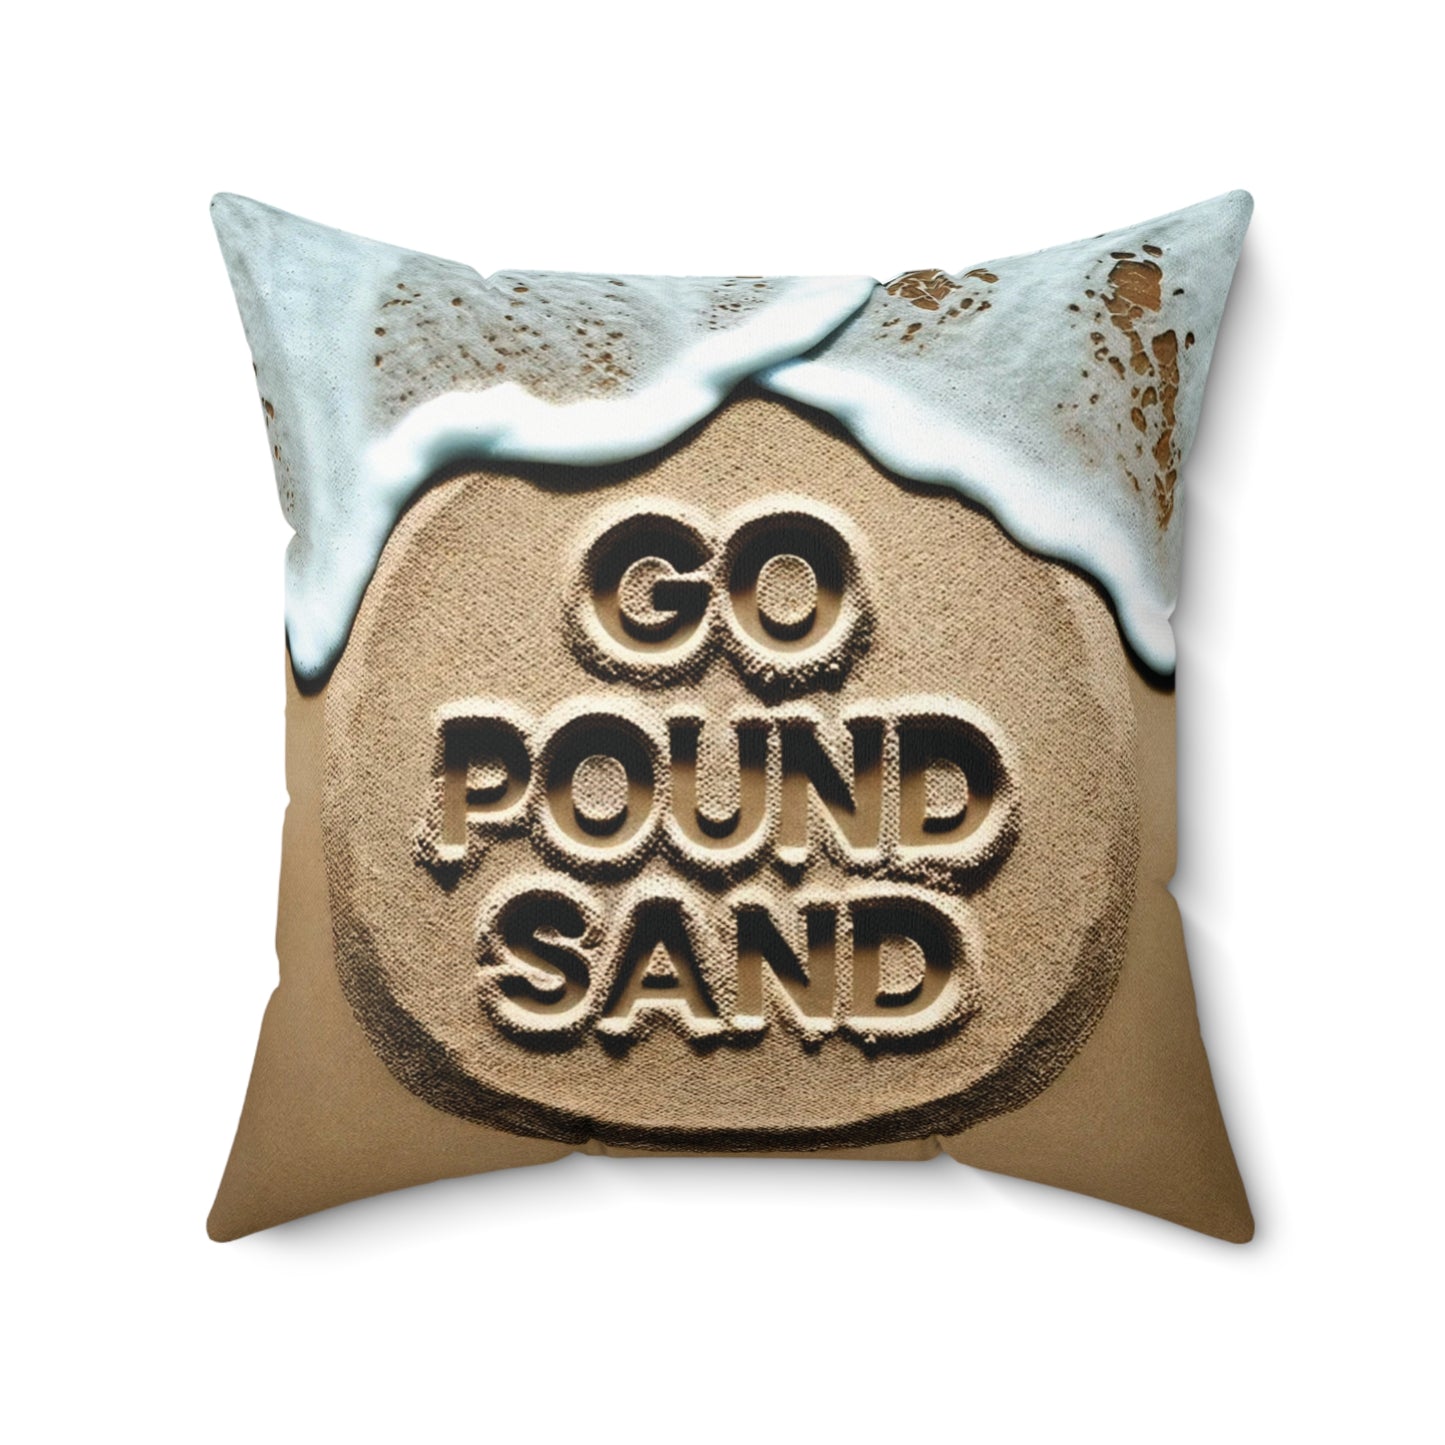 sand Go Pound Sand Humorous Beach Decor Pillow - Comedic Coastal Home Accent, bed14x14 Indoor Cushion, sand brown neutral.